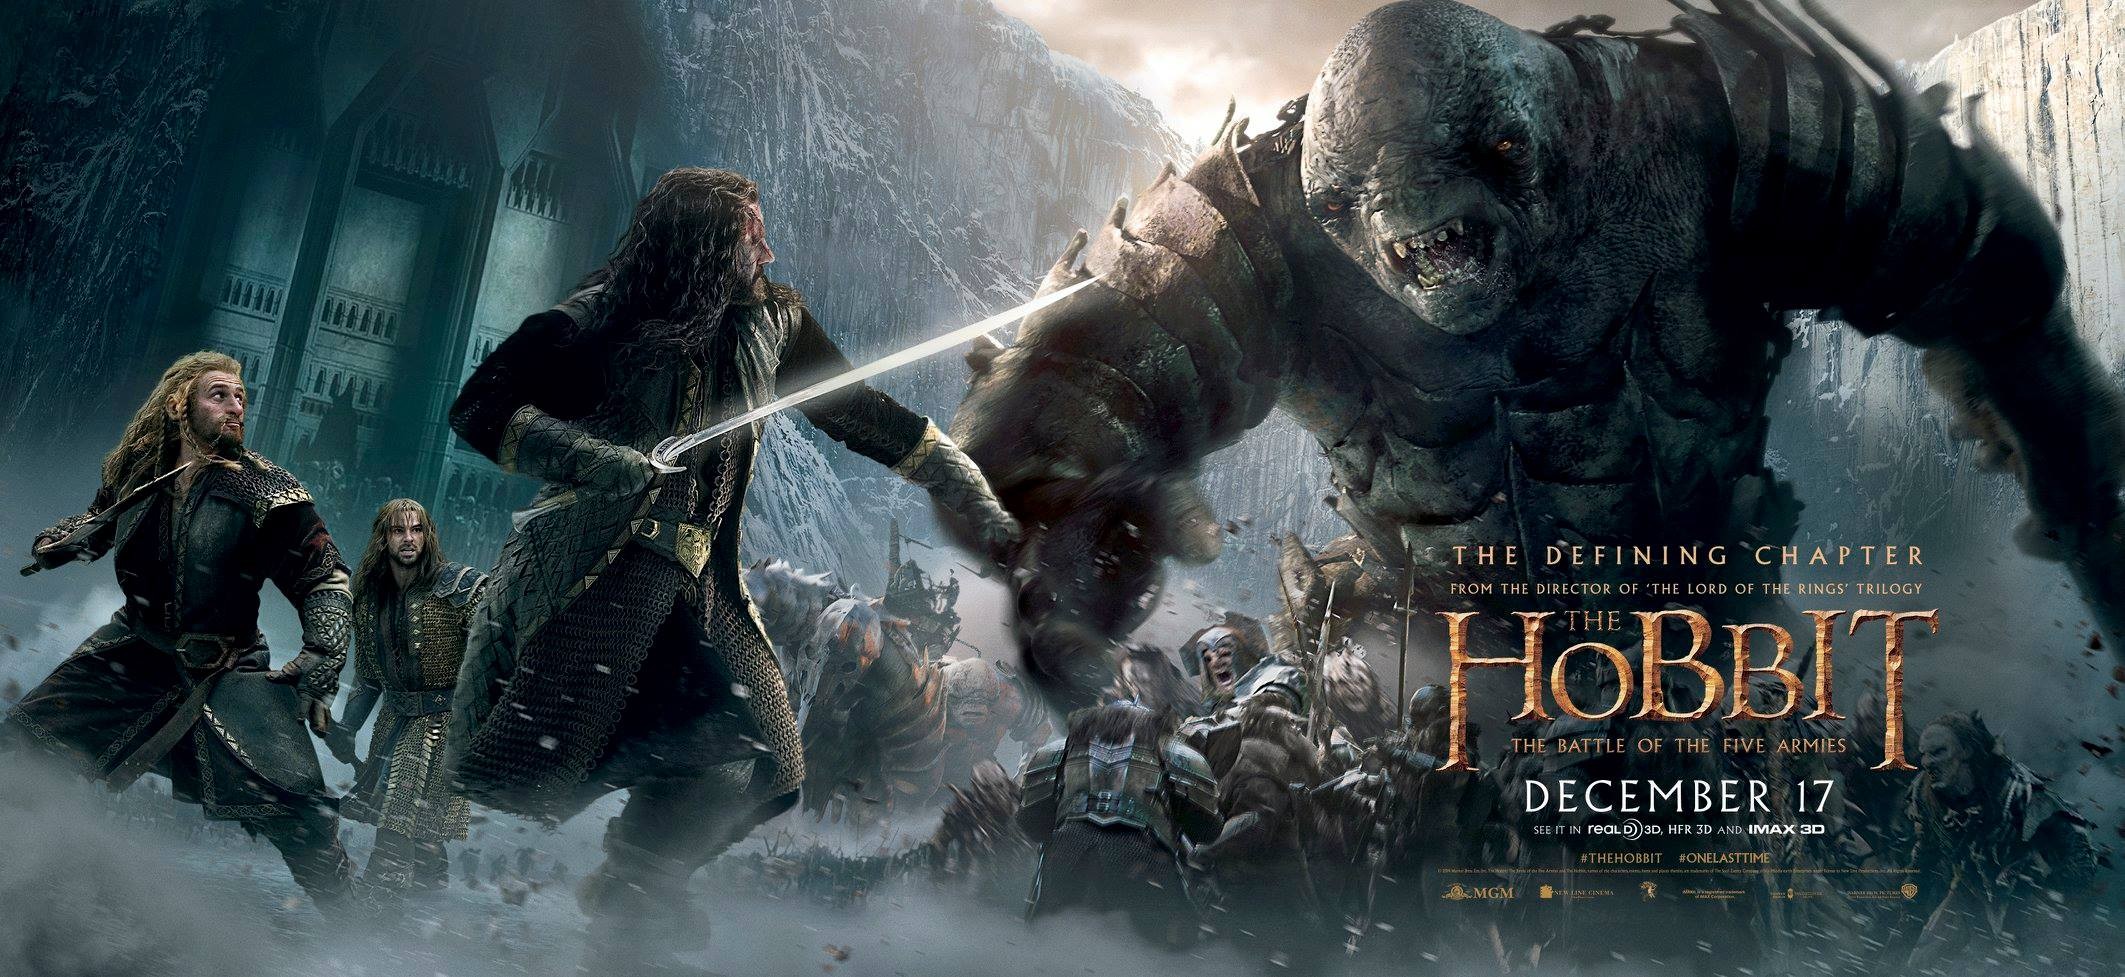 Mega Sized Movie Poster Image for The Hobbit: The Battle of the Five Armies (#23 of 28)